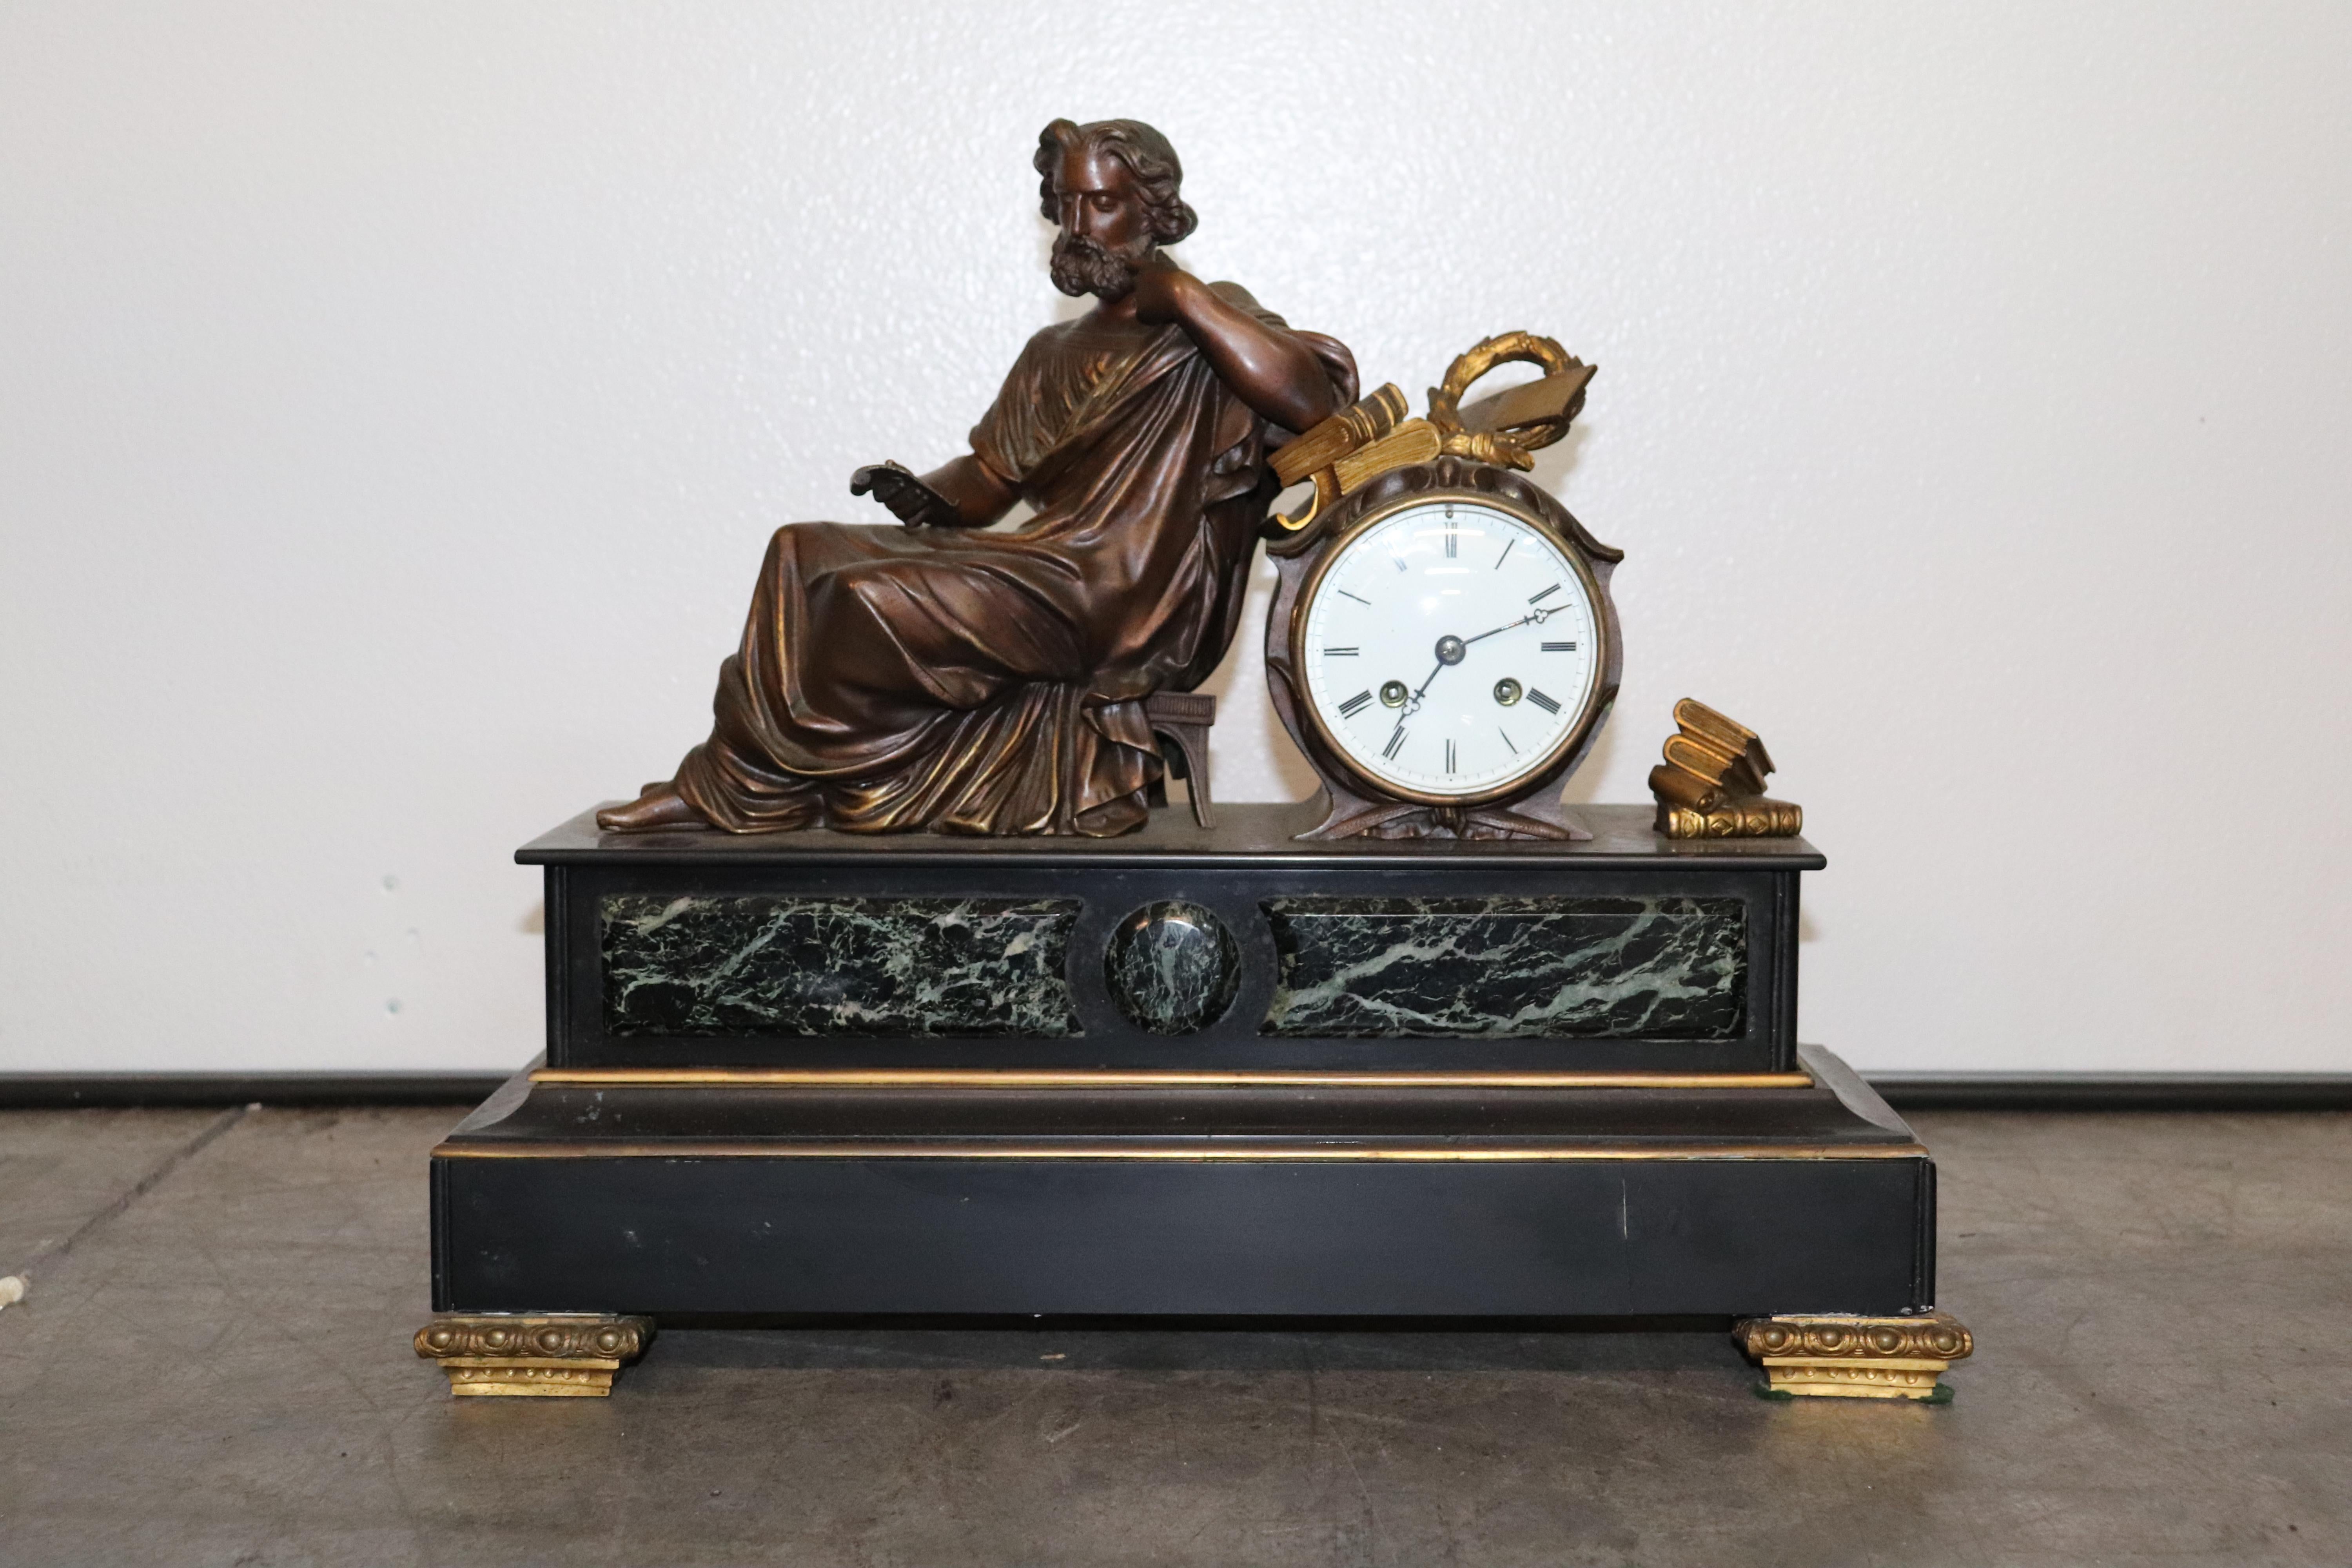 This is a gorgeous and very unique French mantle or mantel clock featuring a gorgeous figure of a scholar in robes recling while reading books. The clock is surmounted with verdi green marble and the base is solid slate or marble with bronze mounts.